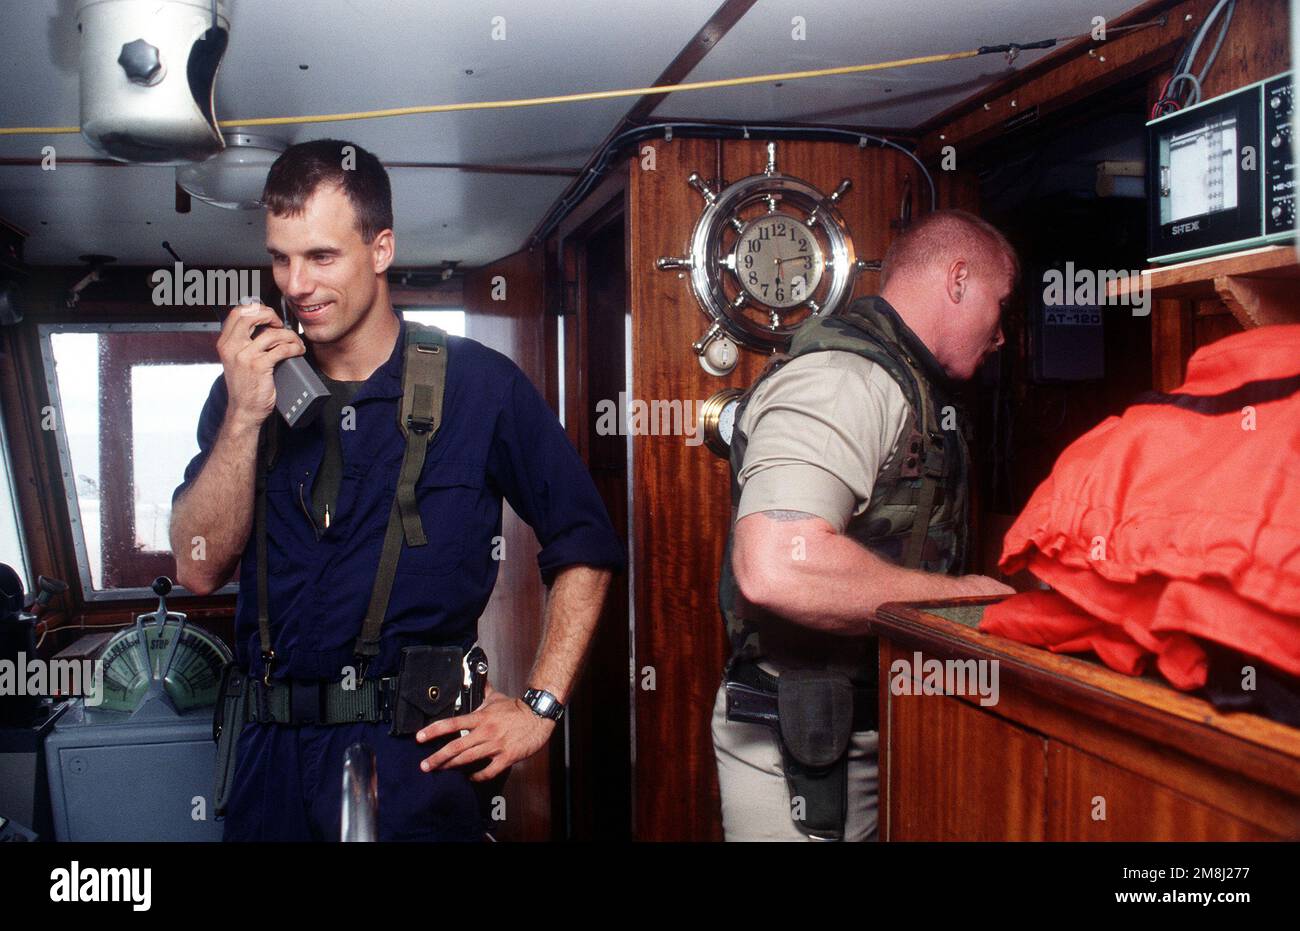 On the bridge of the Haitian-bound merchant vessel BLACK EAGLE, LTJG Craig Bowen, the assistant boarding officer from the training frigate USS AINSWORTH (FFT-1090) keeps in constant communication with the warship. To his left, MASTER CHIEF Boiler Technician (BTCM) George Cohn checks the ships radar and radio compartment during the 100th boarding of a Haitian-bound ship as part of Operation Support Democracy, the United Nations embargo on the flow of arms and fuel into Haiti. Subject Operation/Series: SUPPORT DEMOCRACY Country: Caribbean Sea Stock Photo